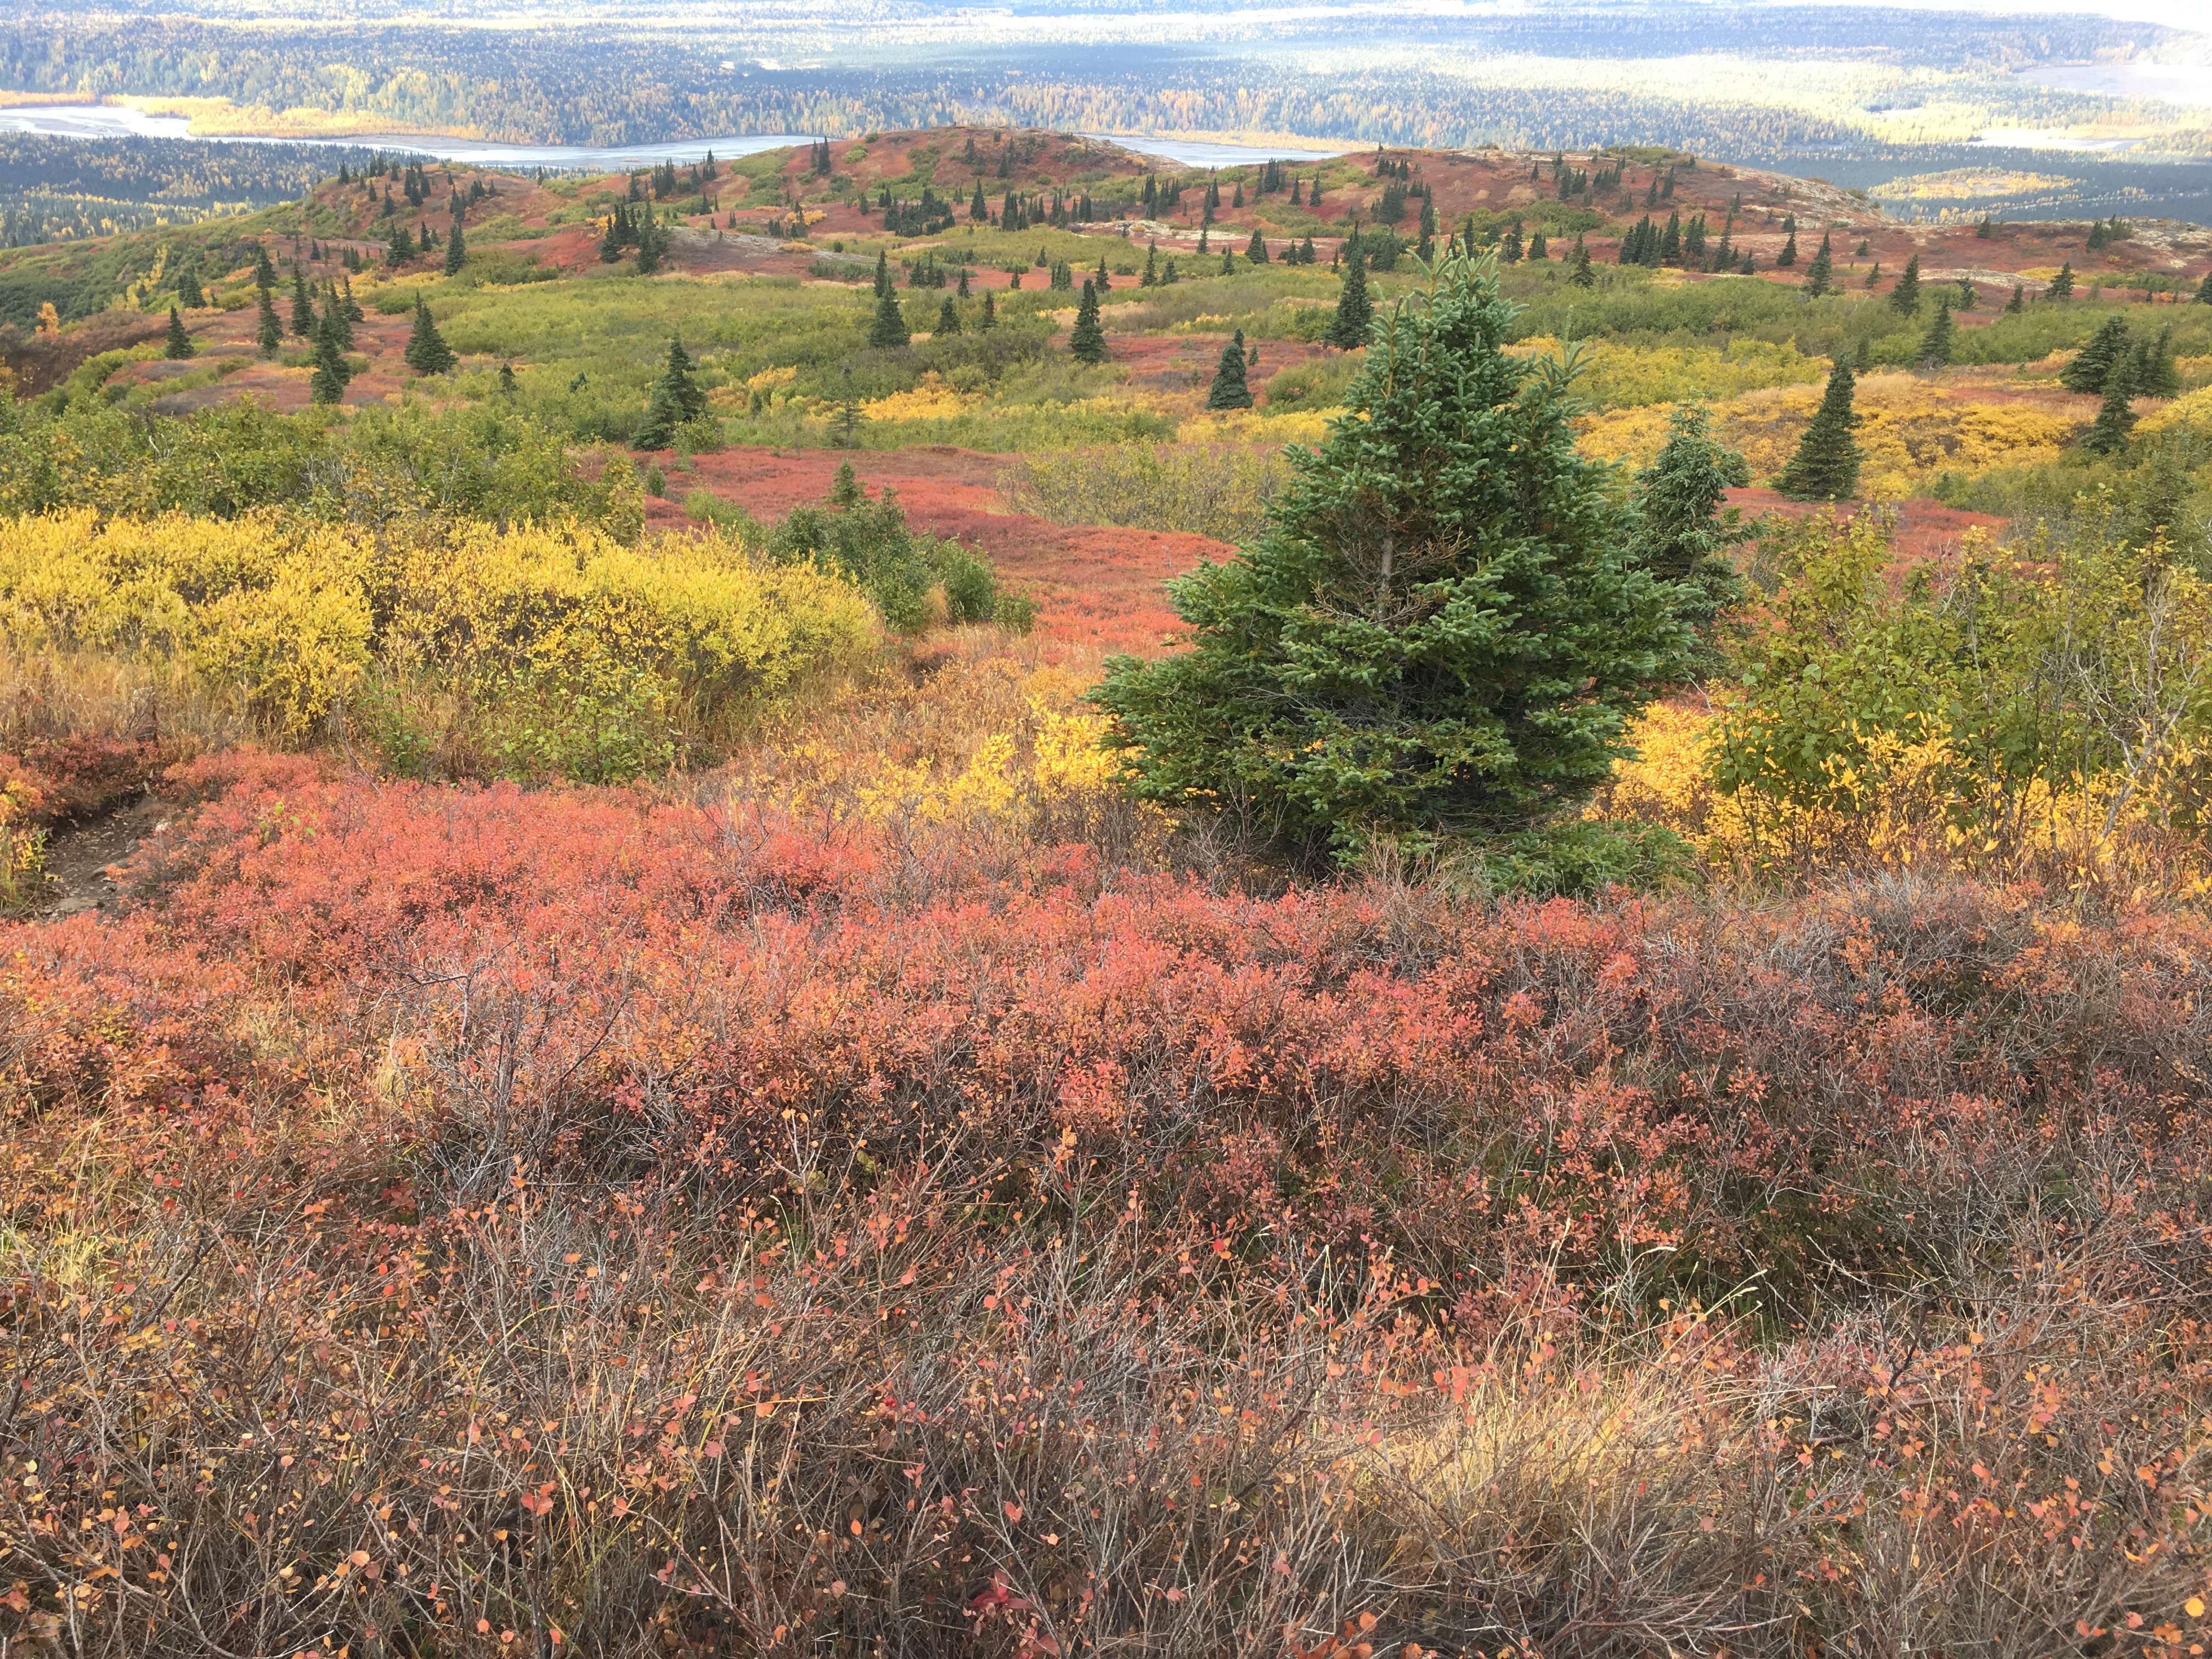 Even the low foliage turns a variety of colors on Kesugi Ridge